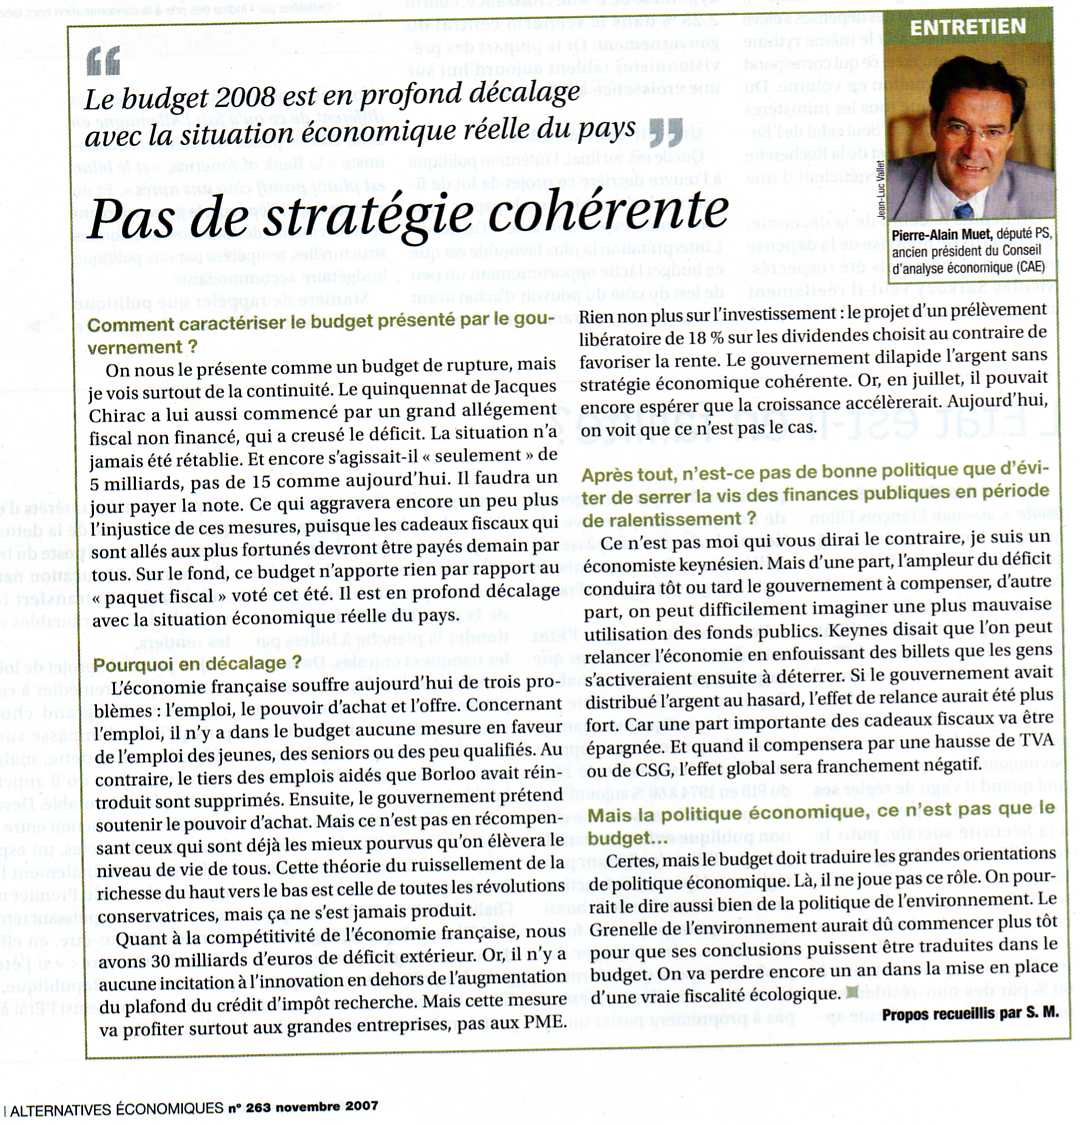 20071115-itw-alter-eco-sur-budget-2008